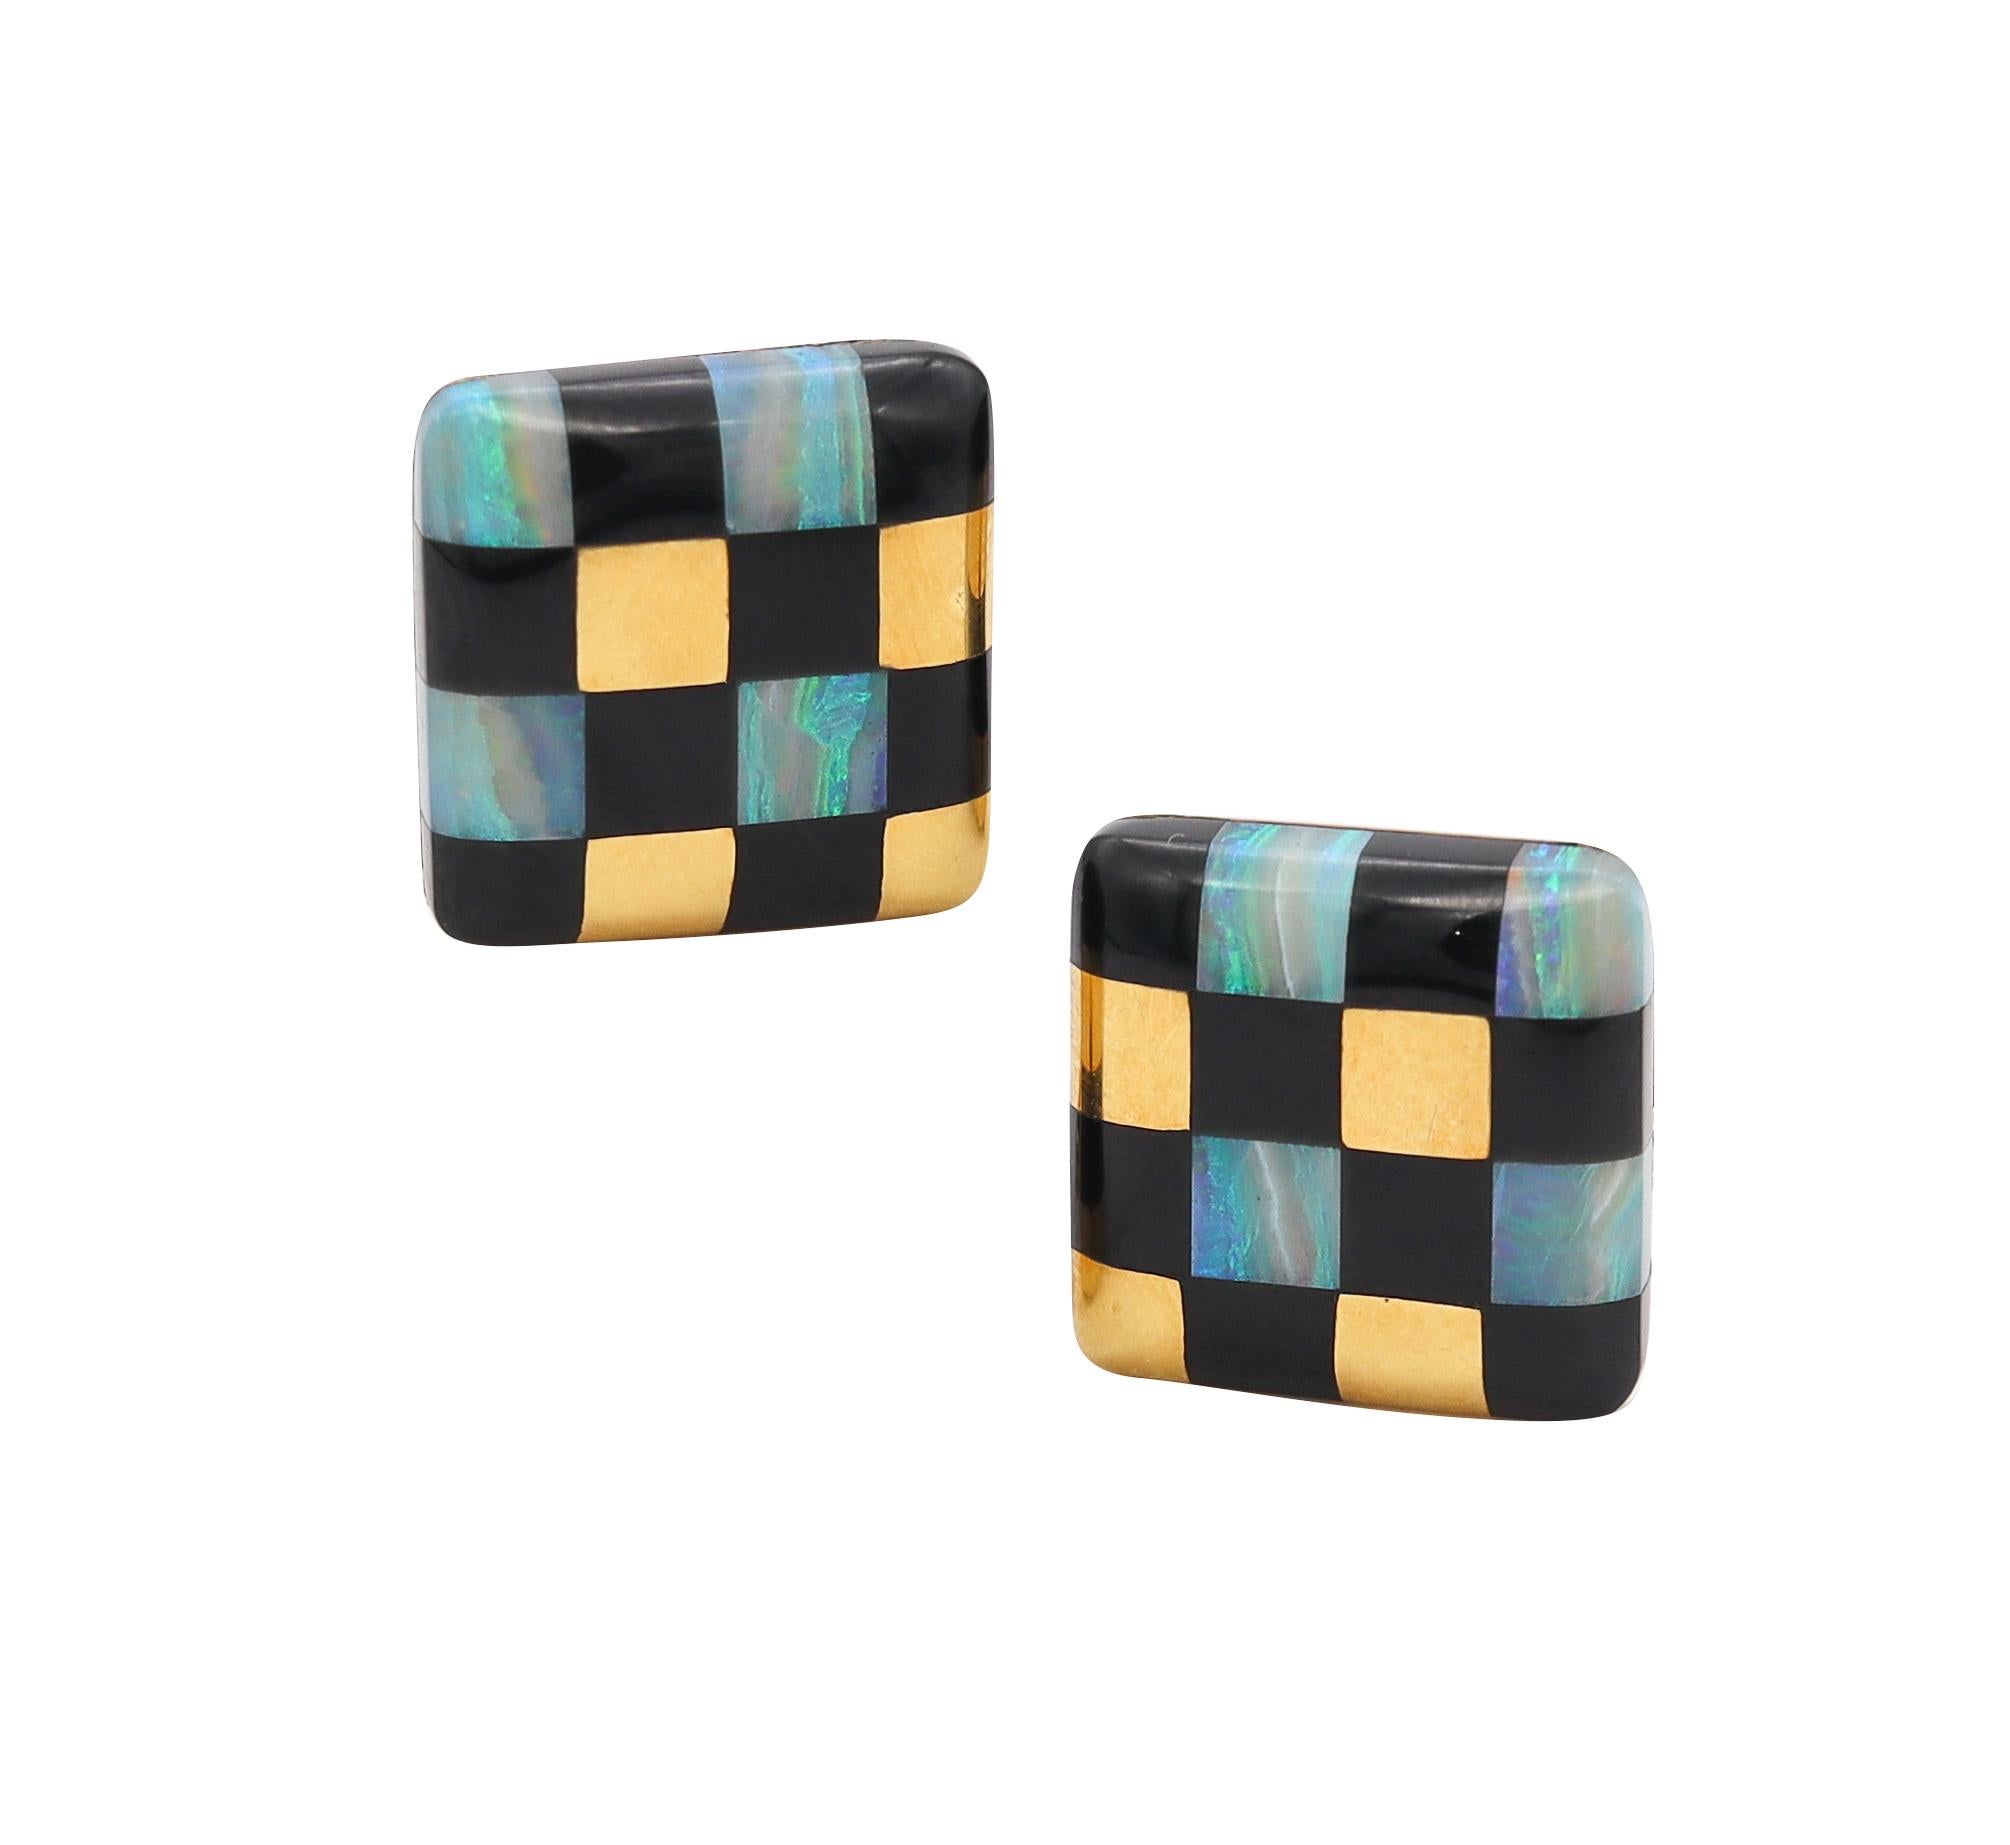 Checkerboard Earrings designed by Angela Cummings for Tiffany & Co.

Beautiful vintage squared geometric pair created by Angela Cummings in New York, back in the early 1980's. This pair of earrings was carefully crafted in solid yellow gold of 18